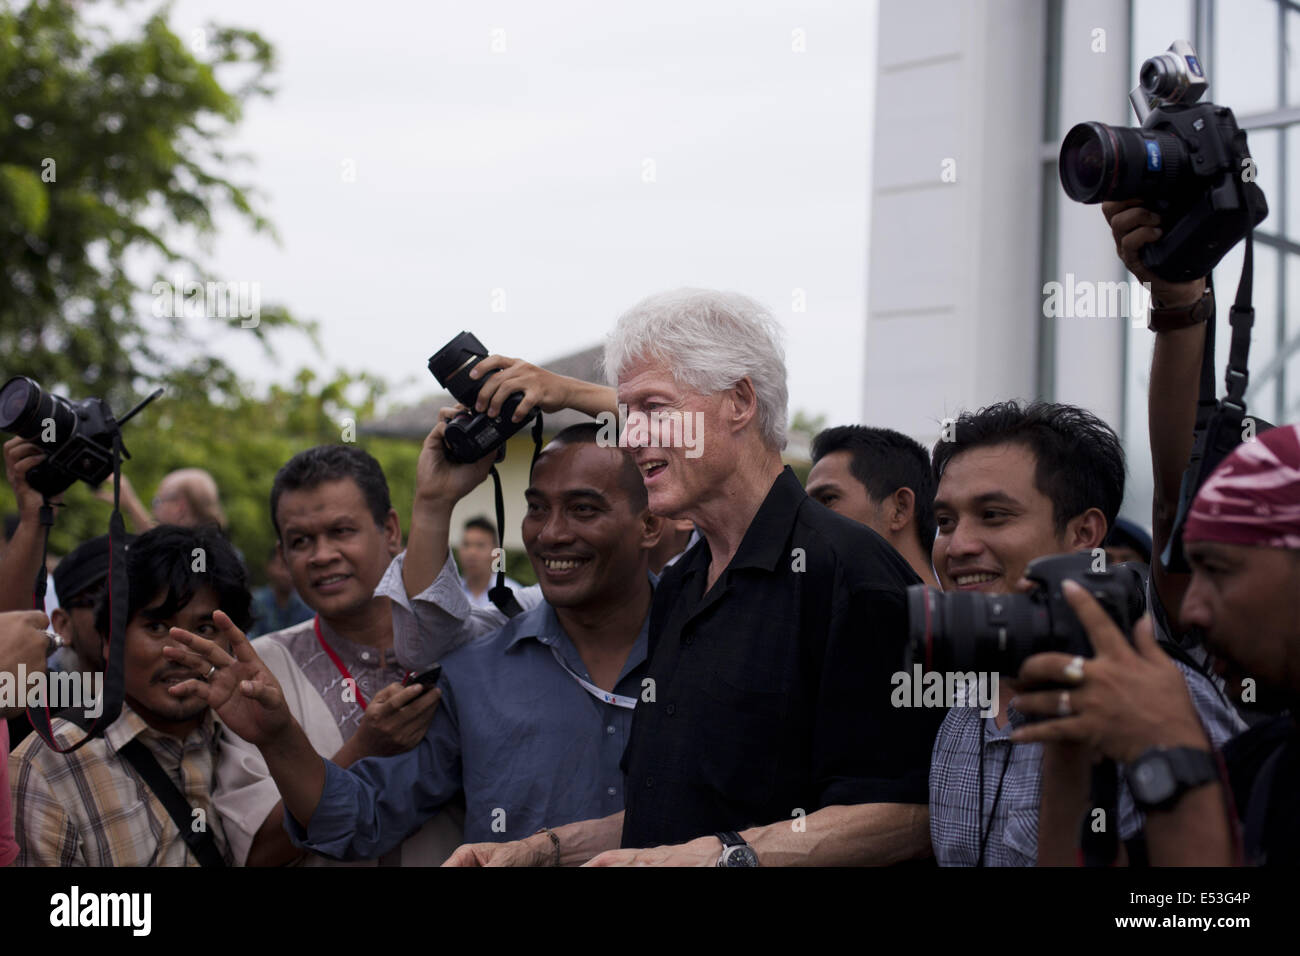 Aceh Besar, Aceh, Indonesia. 19th July, 2014. BILL CLINTON, former US President, pose with journalists, during his visit in Aceh to see reconstruction progress after Tsunami on December 26th 2004.Aceh, a province in Indonesia, is the worst hit area during 2004 Tsunami. Around 221,000 people killed or missing. Credit:  Fauzan Ijazah/ZUMA Wire/Alamy Live News Stock Photo